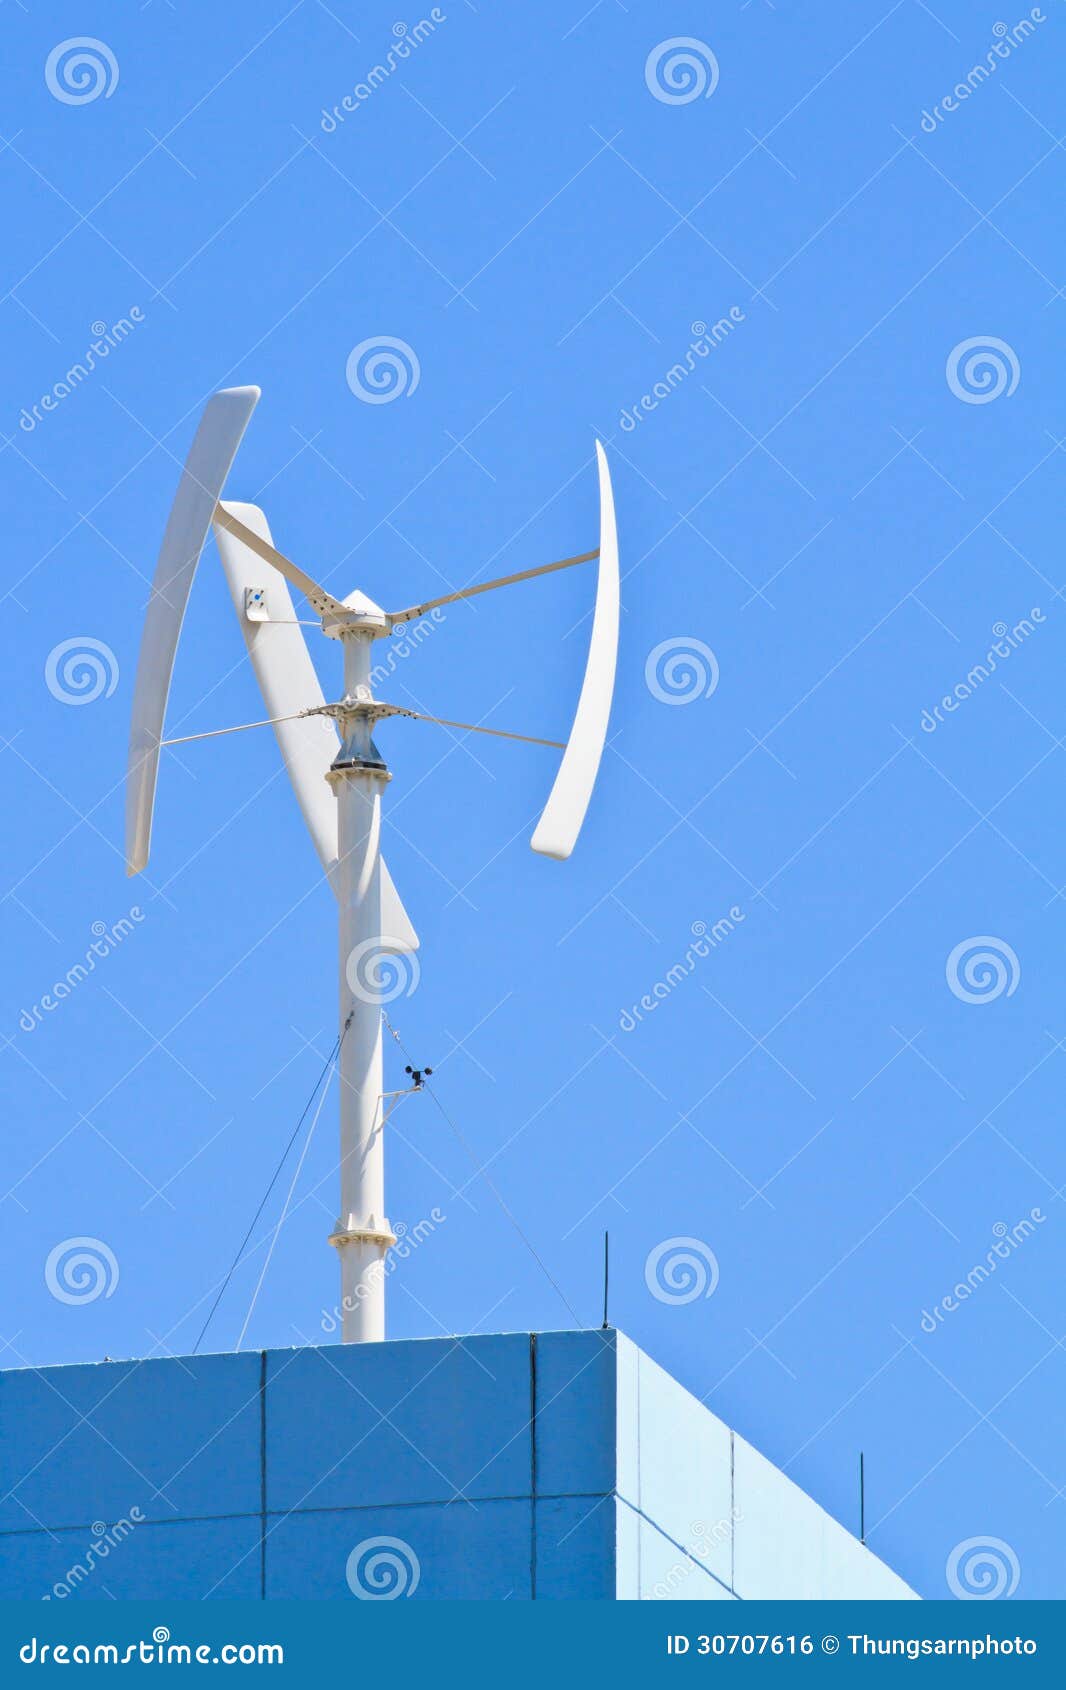 Vertical Wind Turbine On The Top Of Building Royalty Free Stock Image 